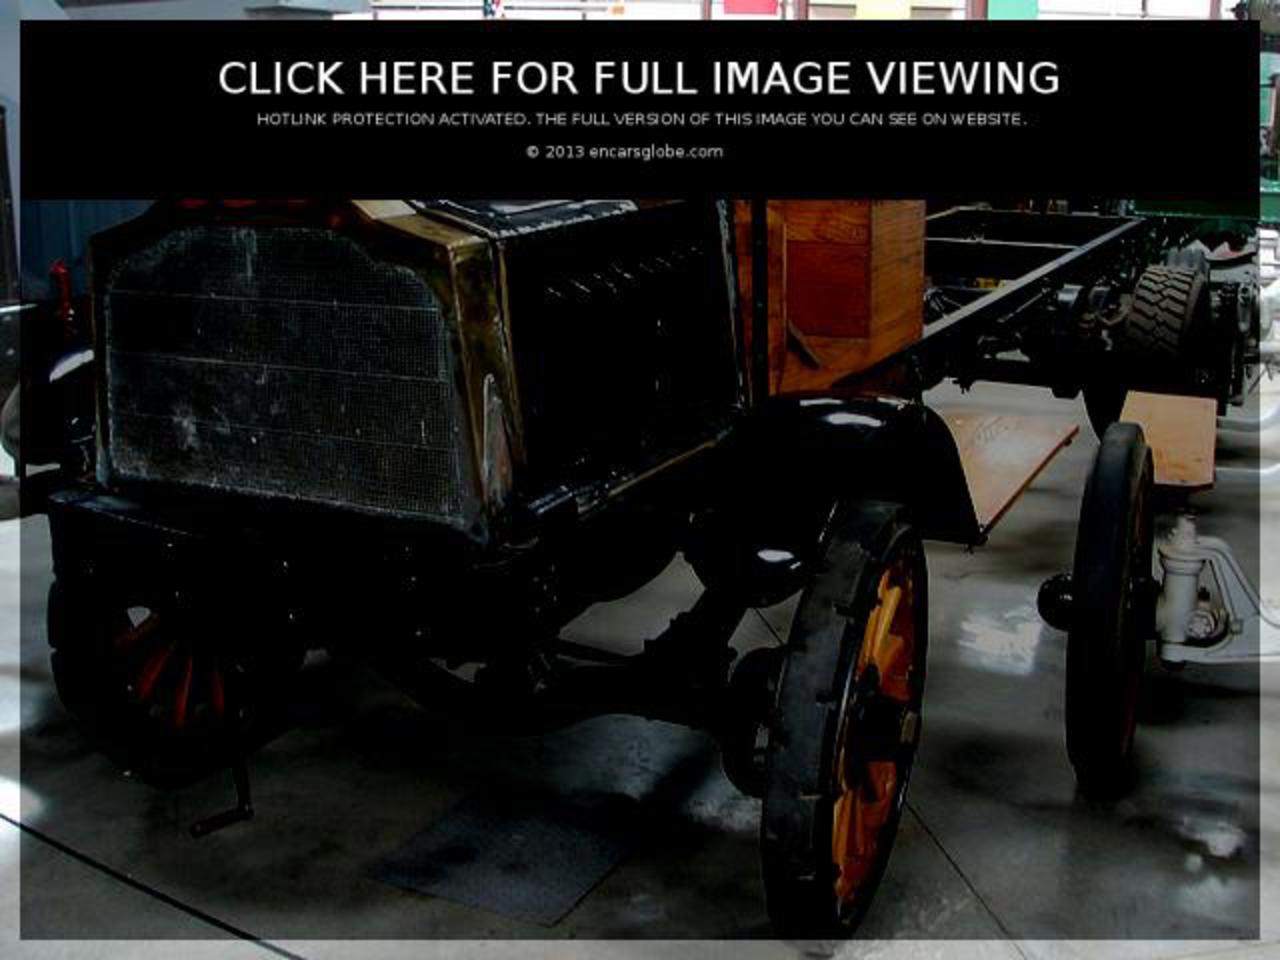 Packard 1803 Convertible Sedan Photo Gallery: Photo #07 out of 9 ...